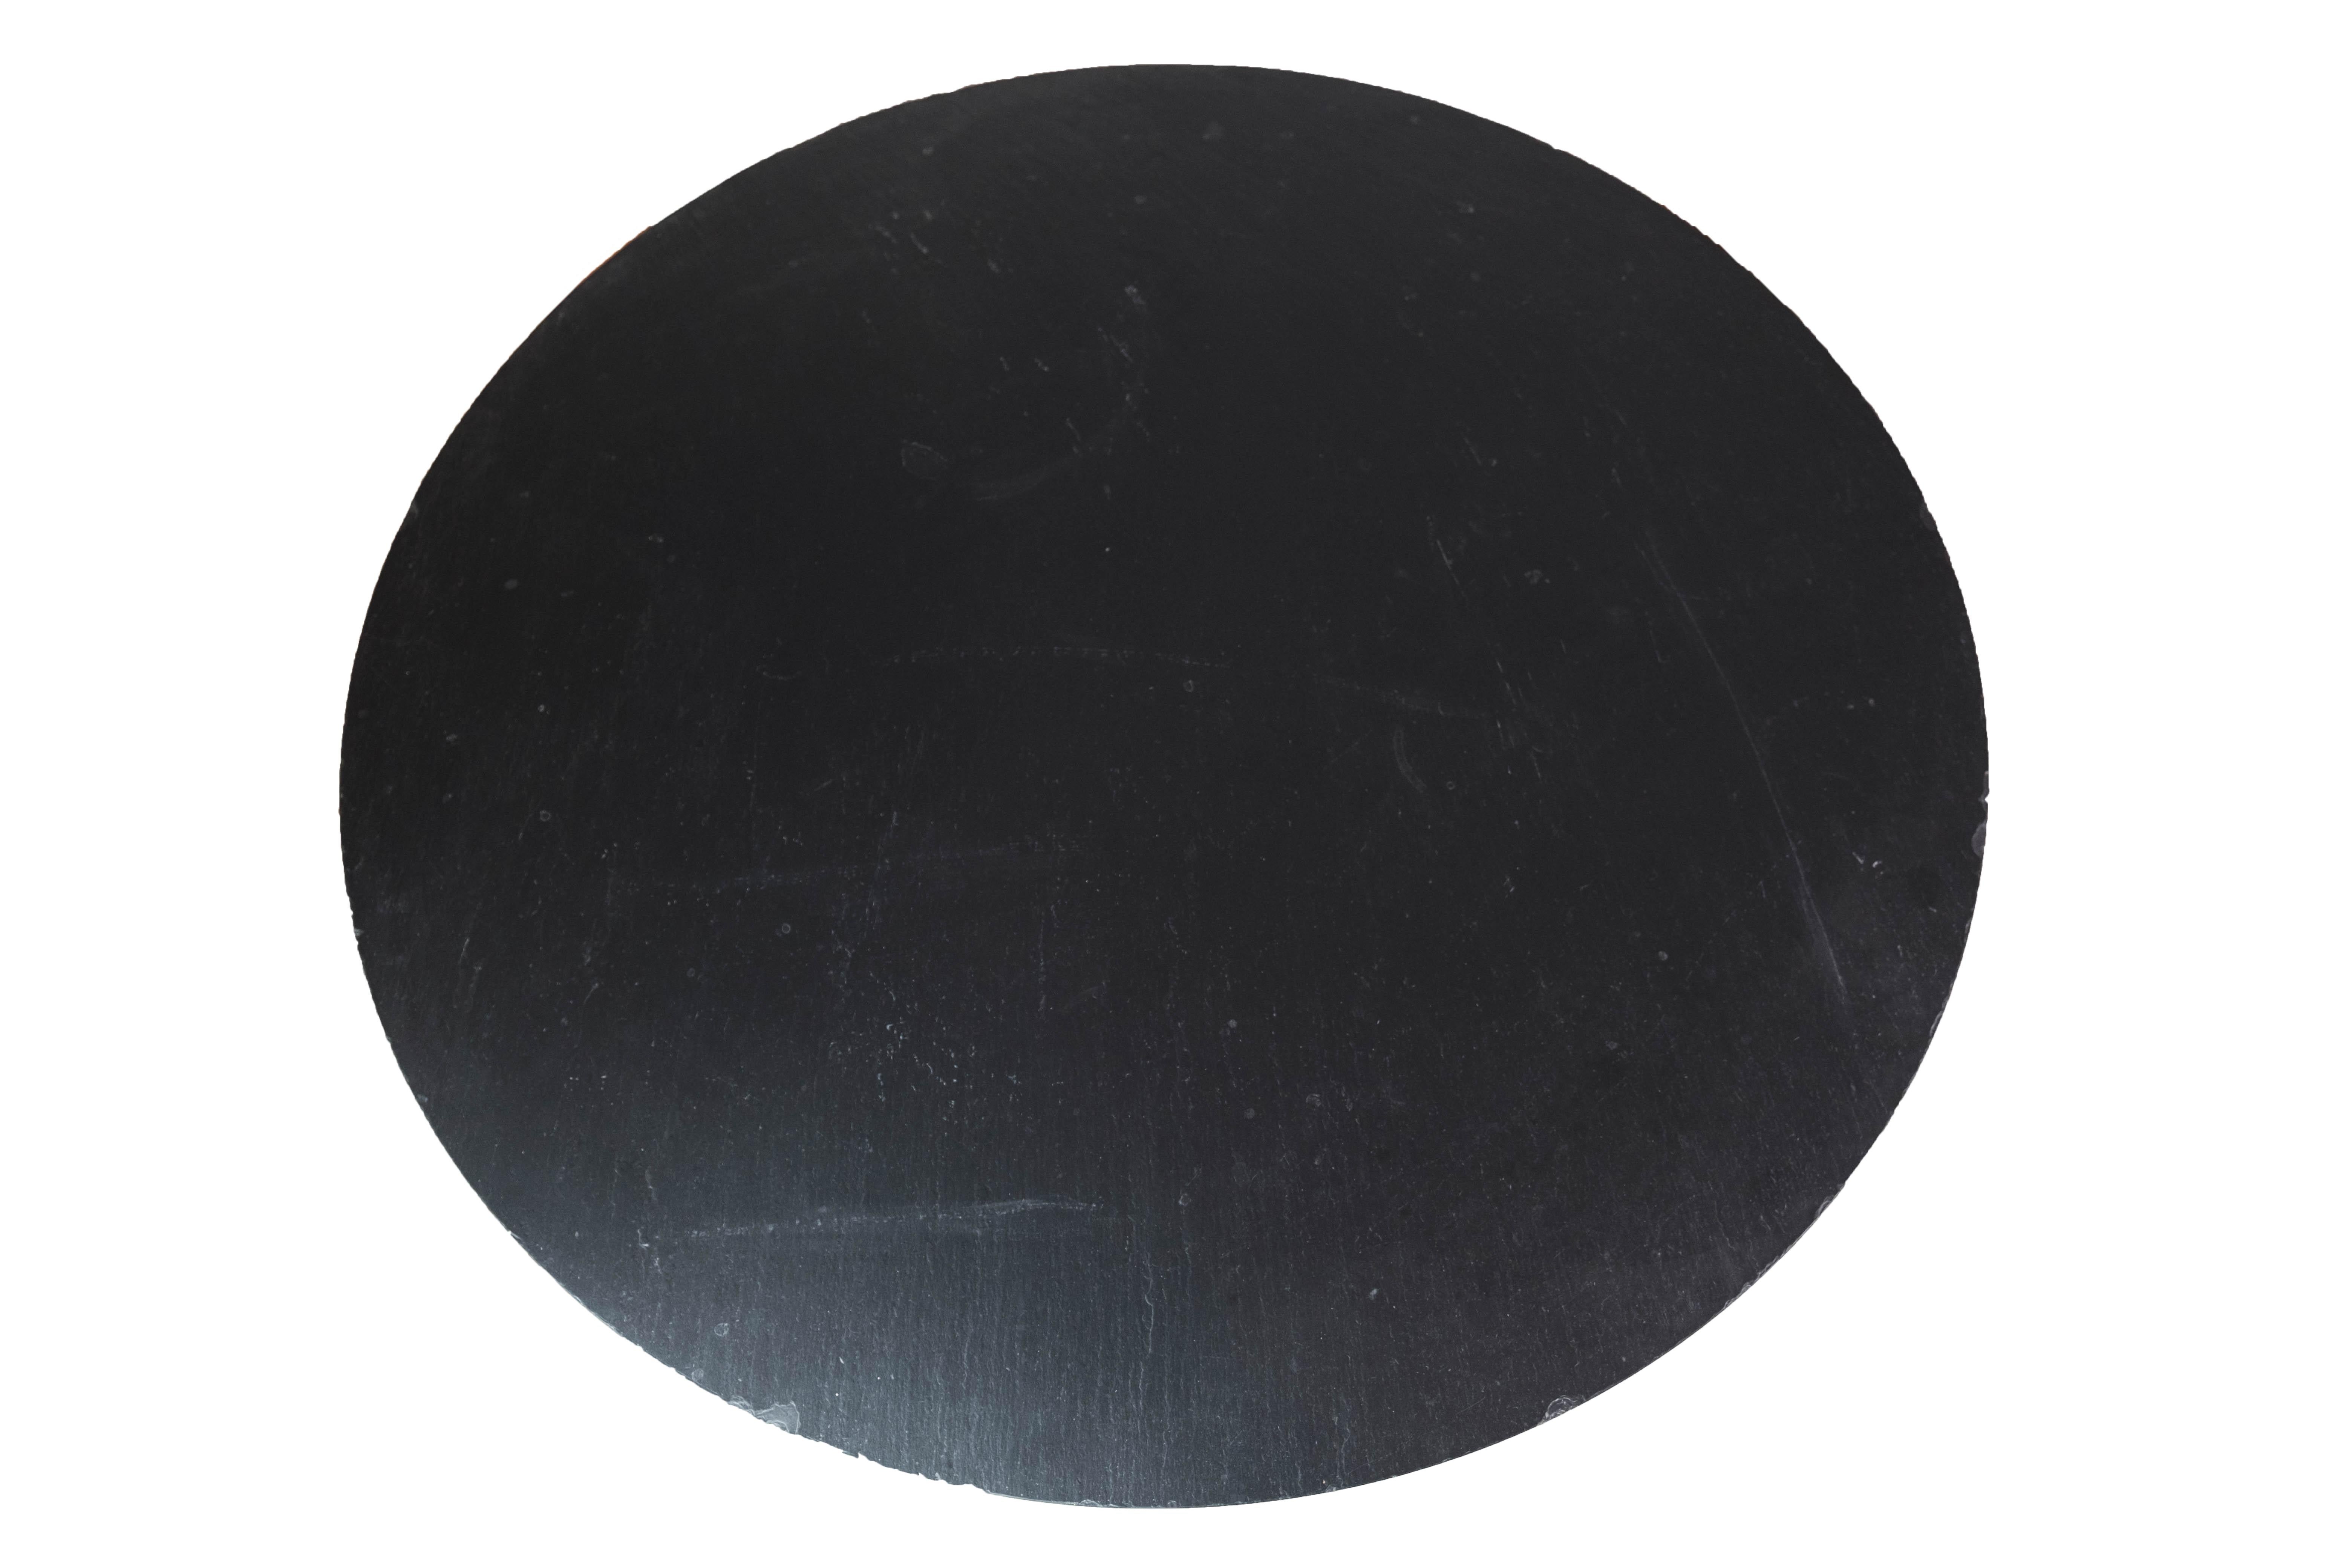 Mid-Century Modern Round Coffee Table With Black Slate Plate By Sigurd Ressell Falcon From 1960s For Sale